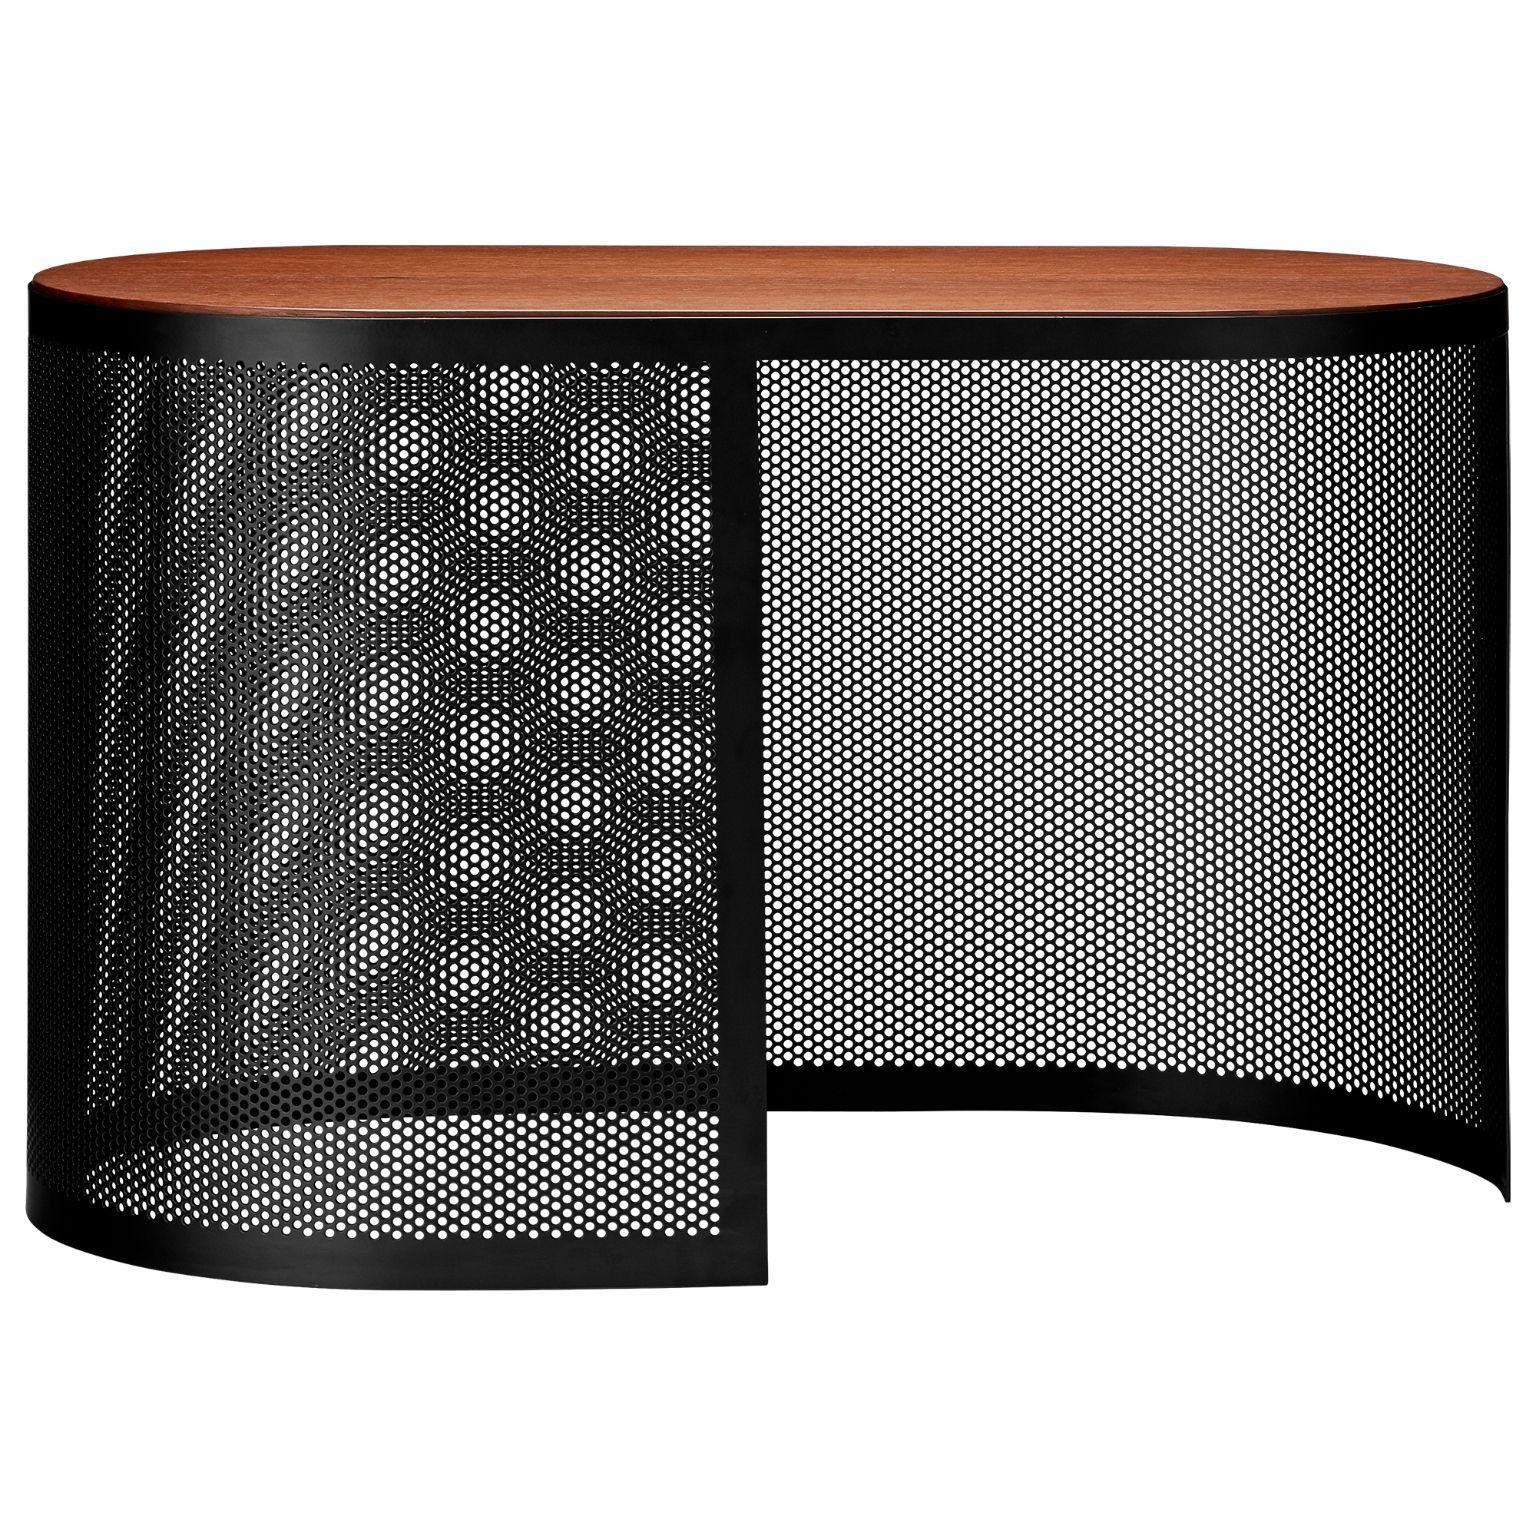 Walnut and steel contemporary side table
Dimensions: L 70 x W 35 x H 43.3 CM
Materials: Steel, MDF with walnut veneer 

This tables can be placed in any room that calls for extra creative space. They are made of perforated metal in black and